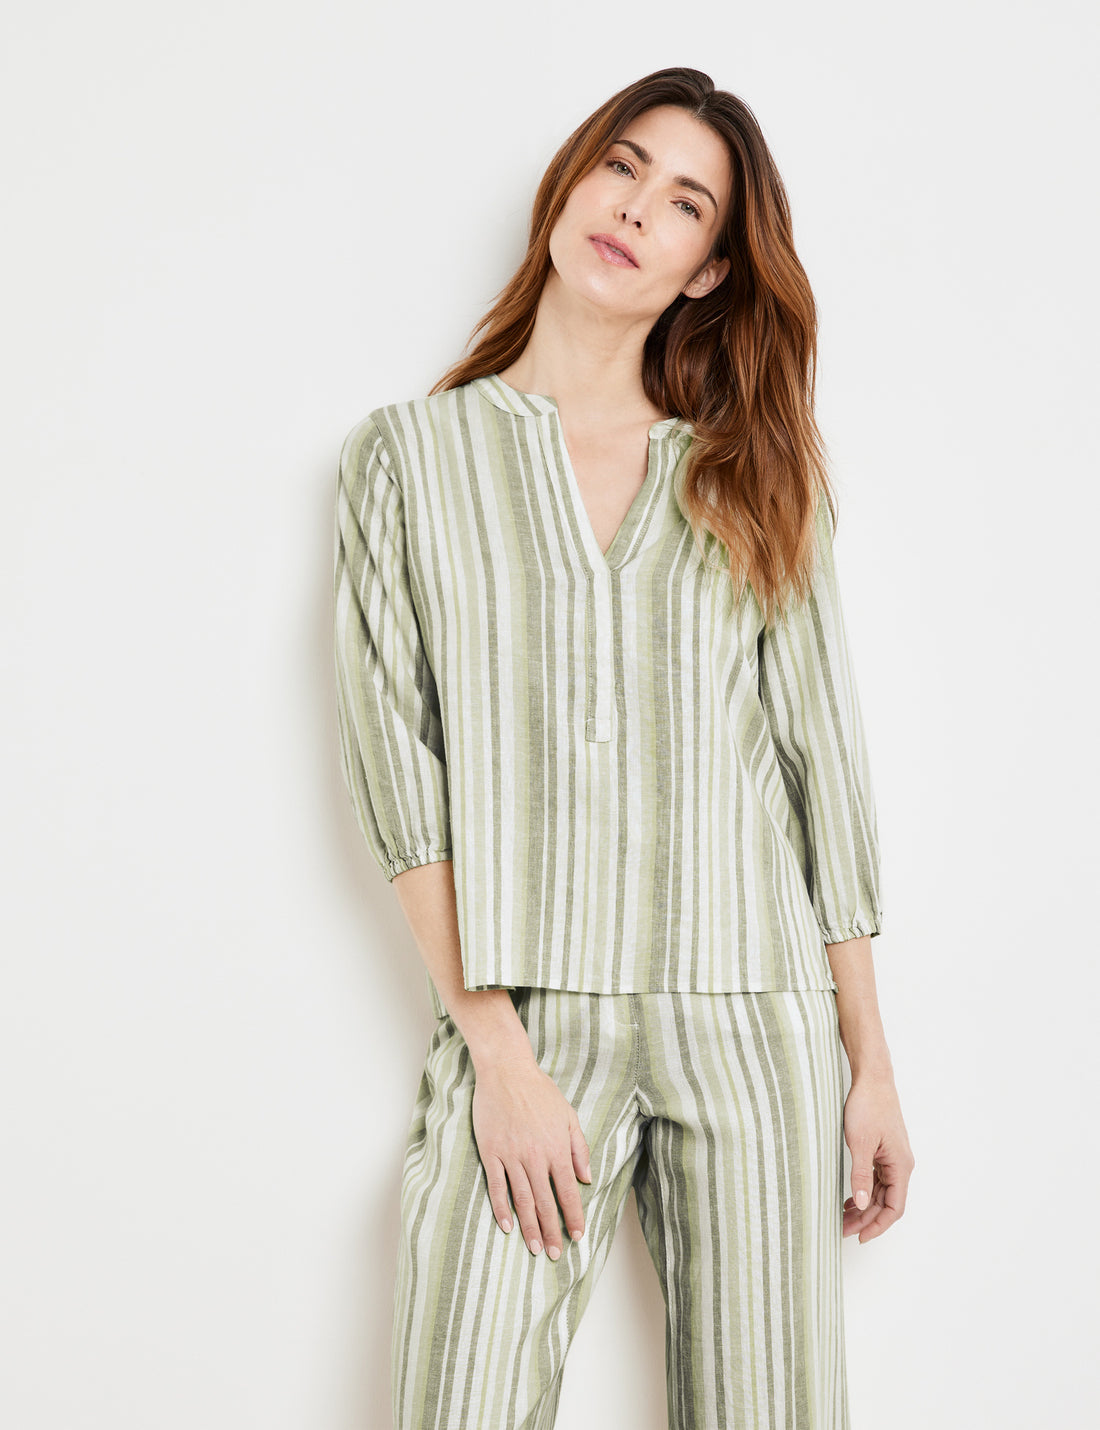 Striped Linen Blend Blouse With 3/4-Length Sleeves